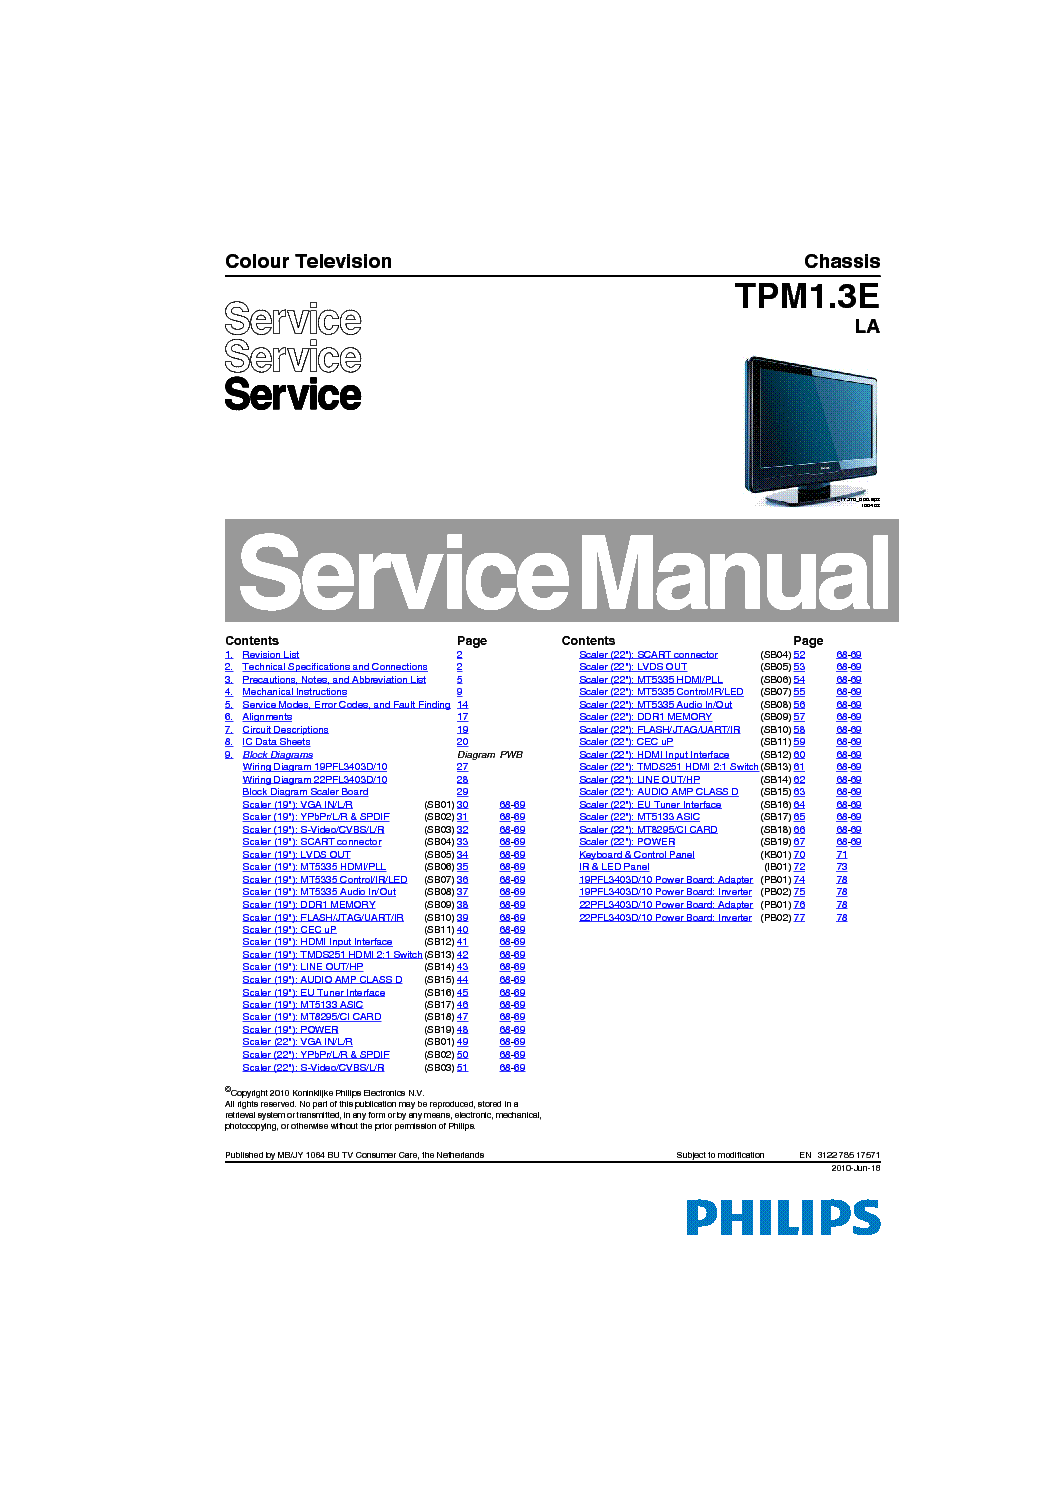 PHILIPS TPM1.3ELA 312278517571 service manual (1st page)